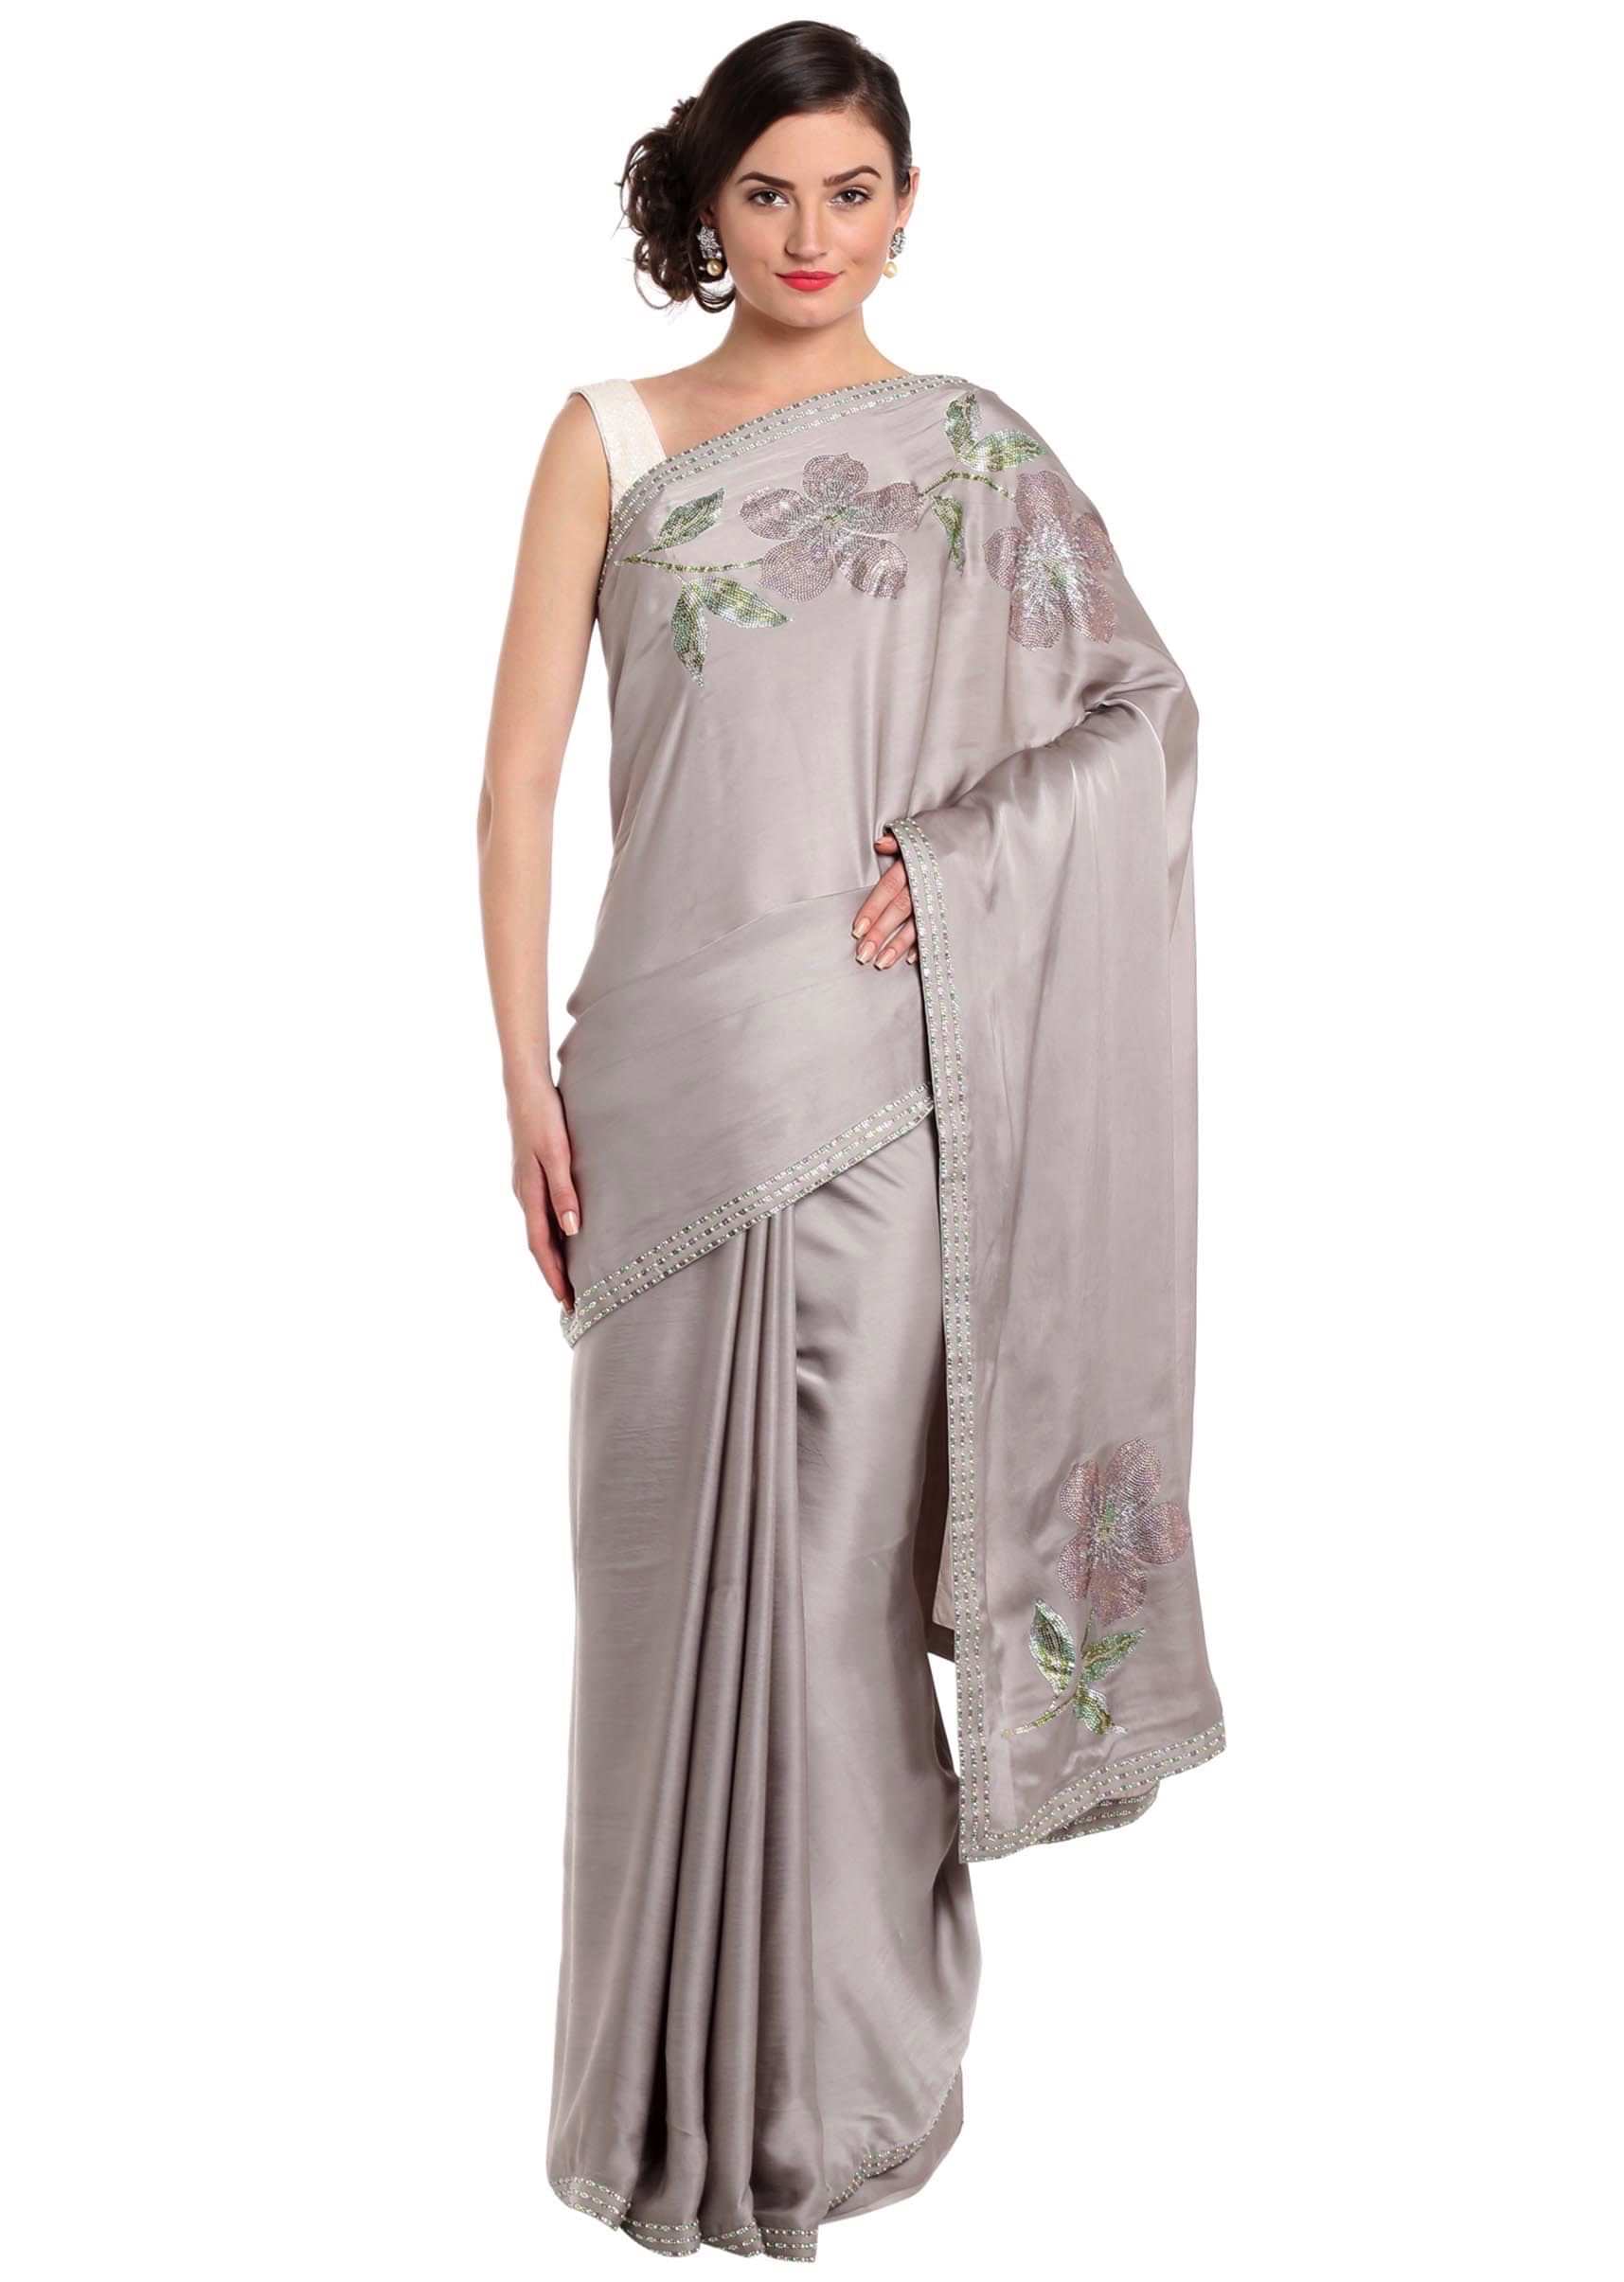 Sand Grey Saree With Kundan Embroidery In Floral Motif Online - Kalki Fashion